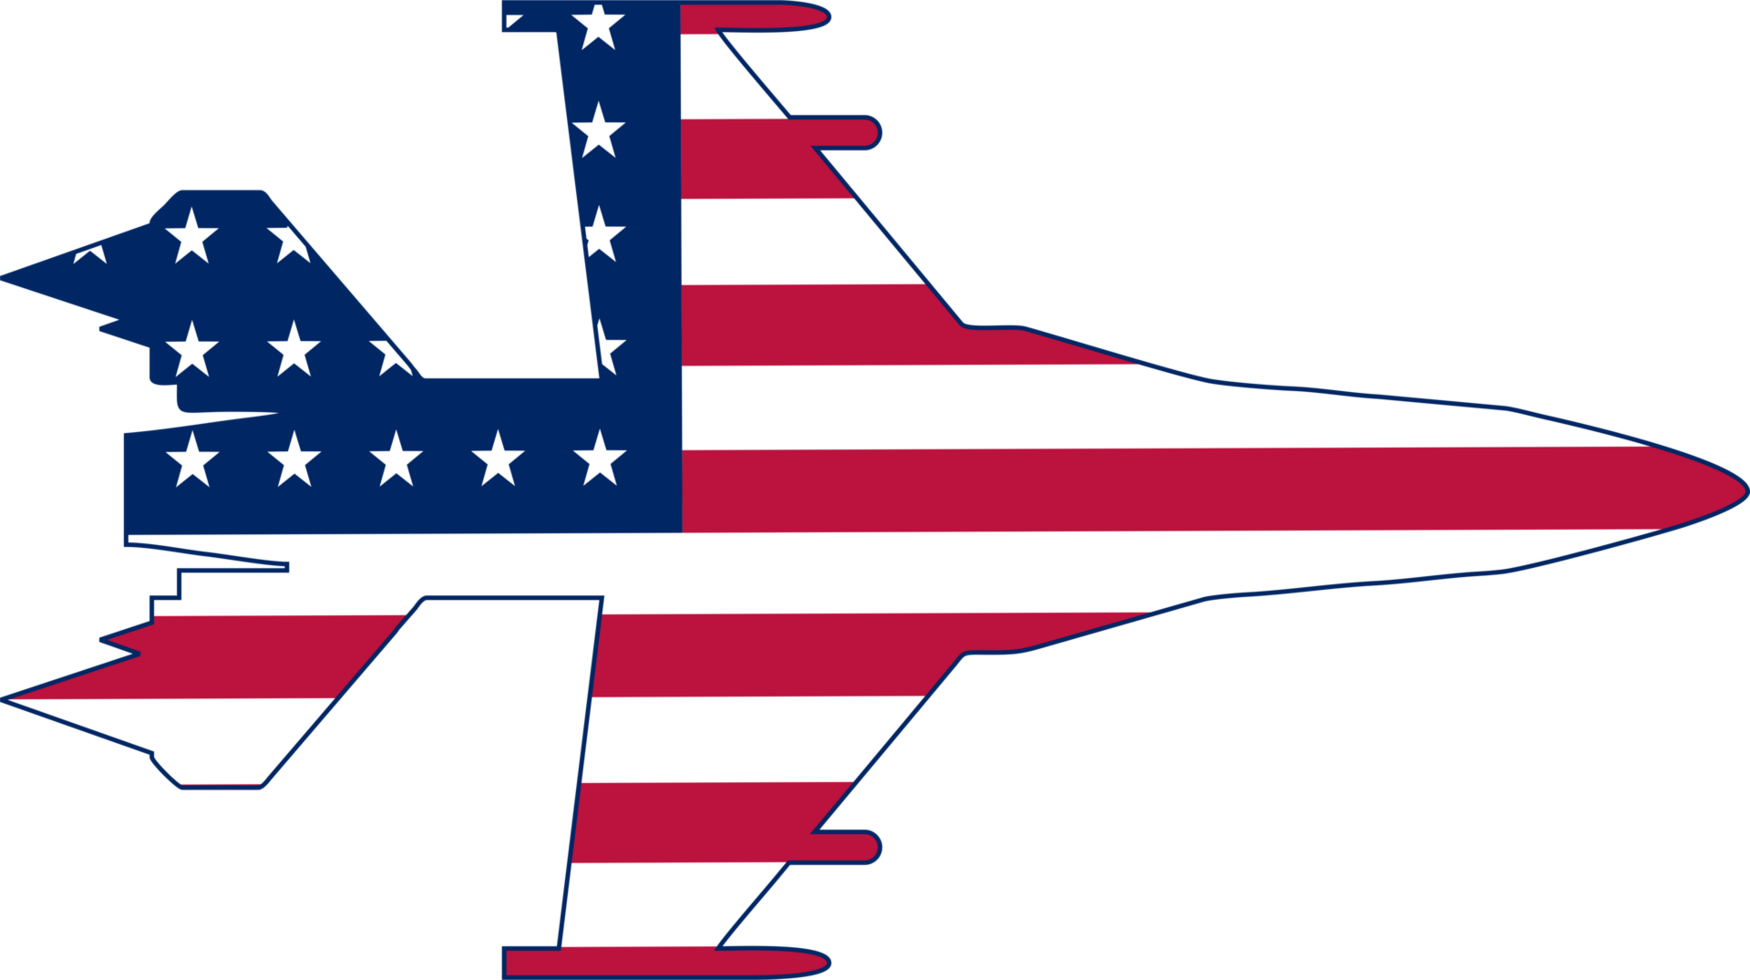 Fighter jet with American flag icon design transparent background png